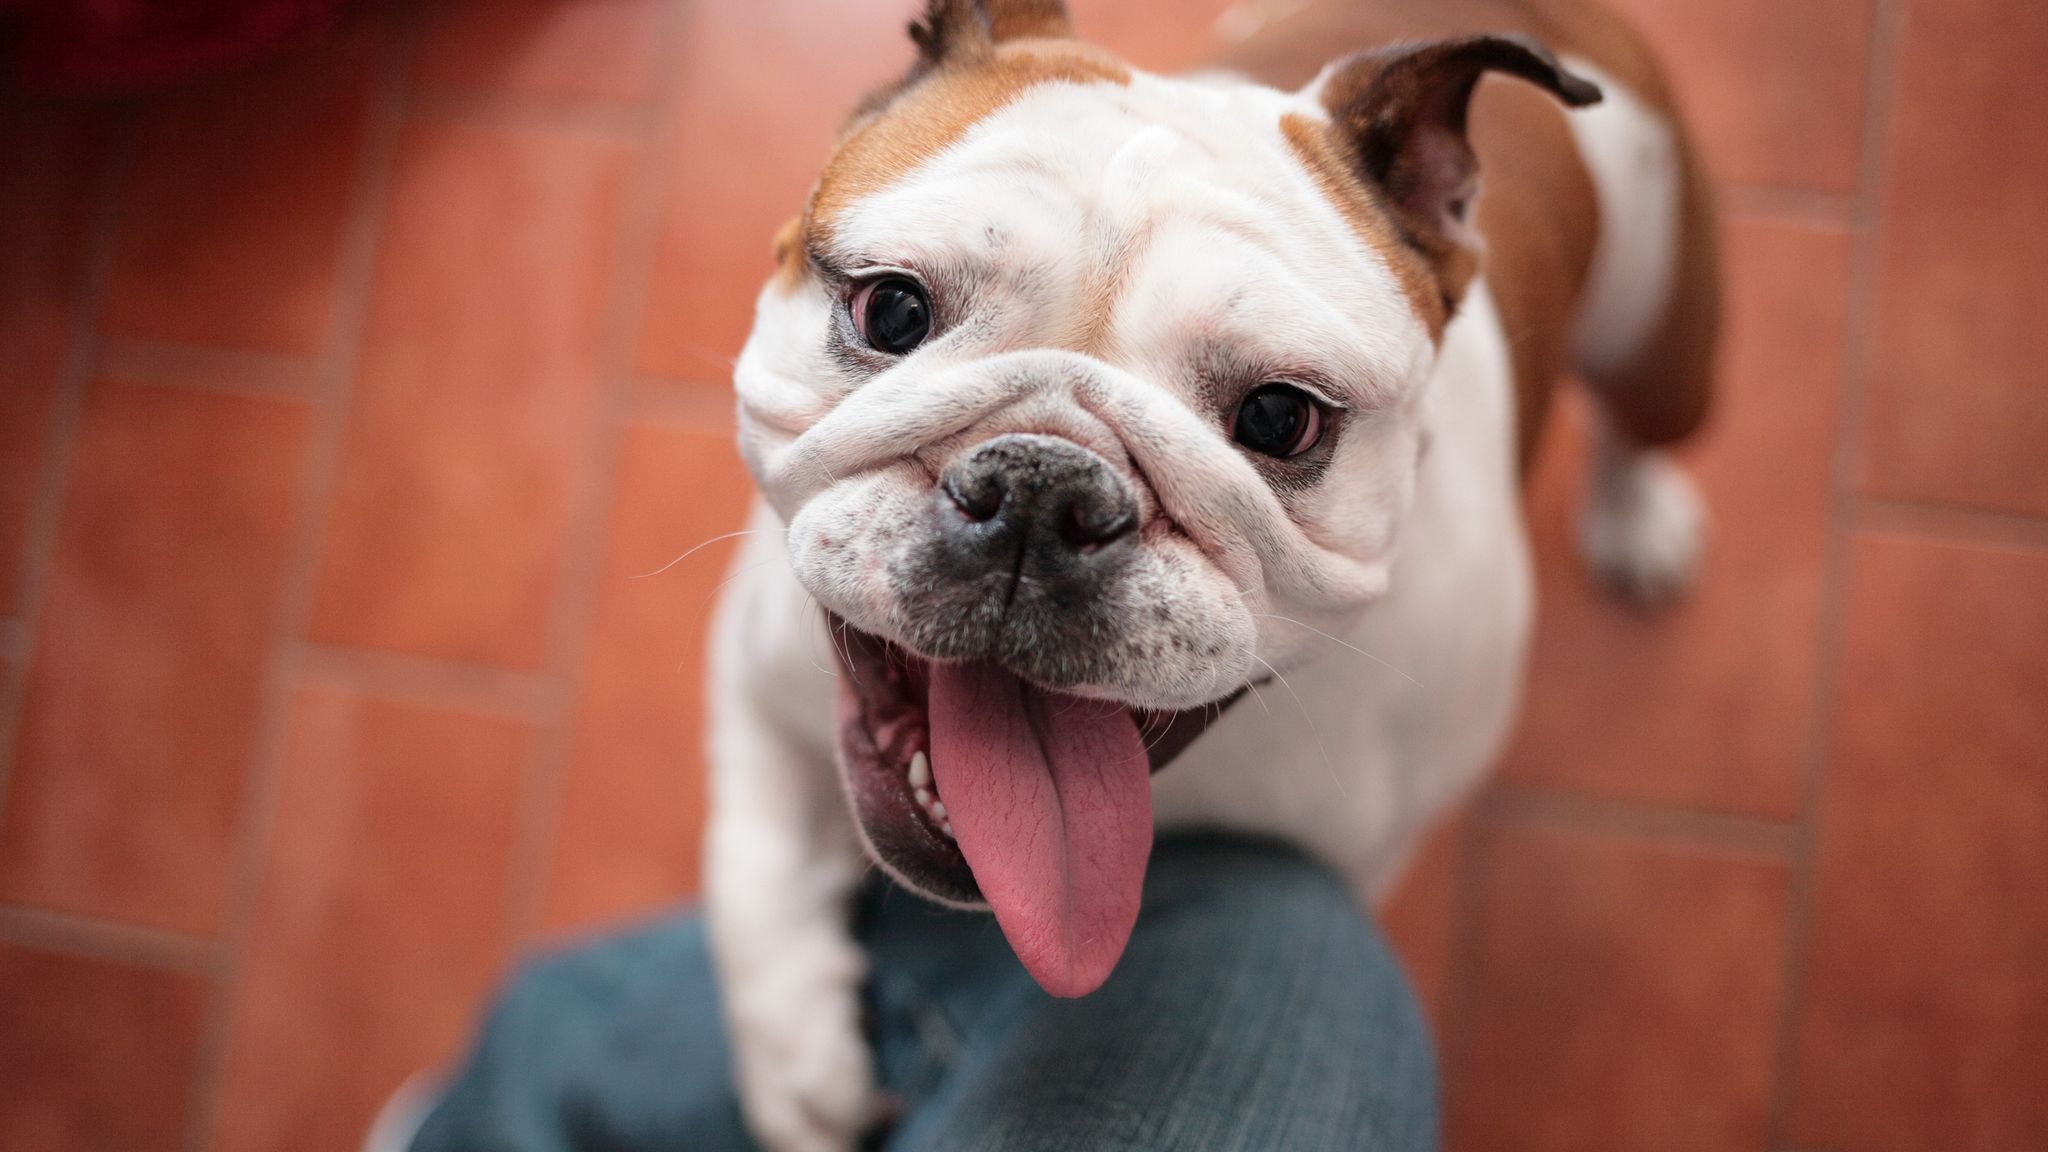 British bulldog ownership has doubled but breed faces high risk of skin  disease and obesity